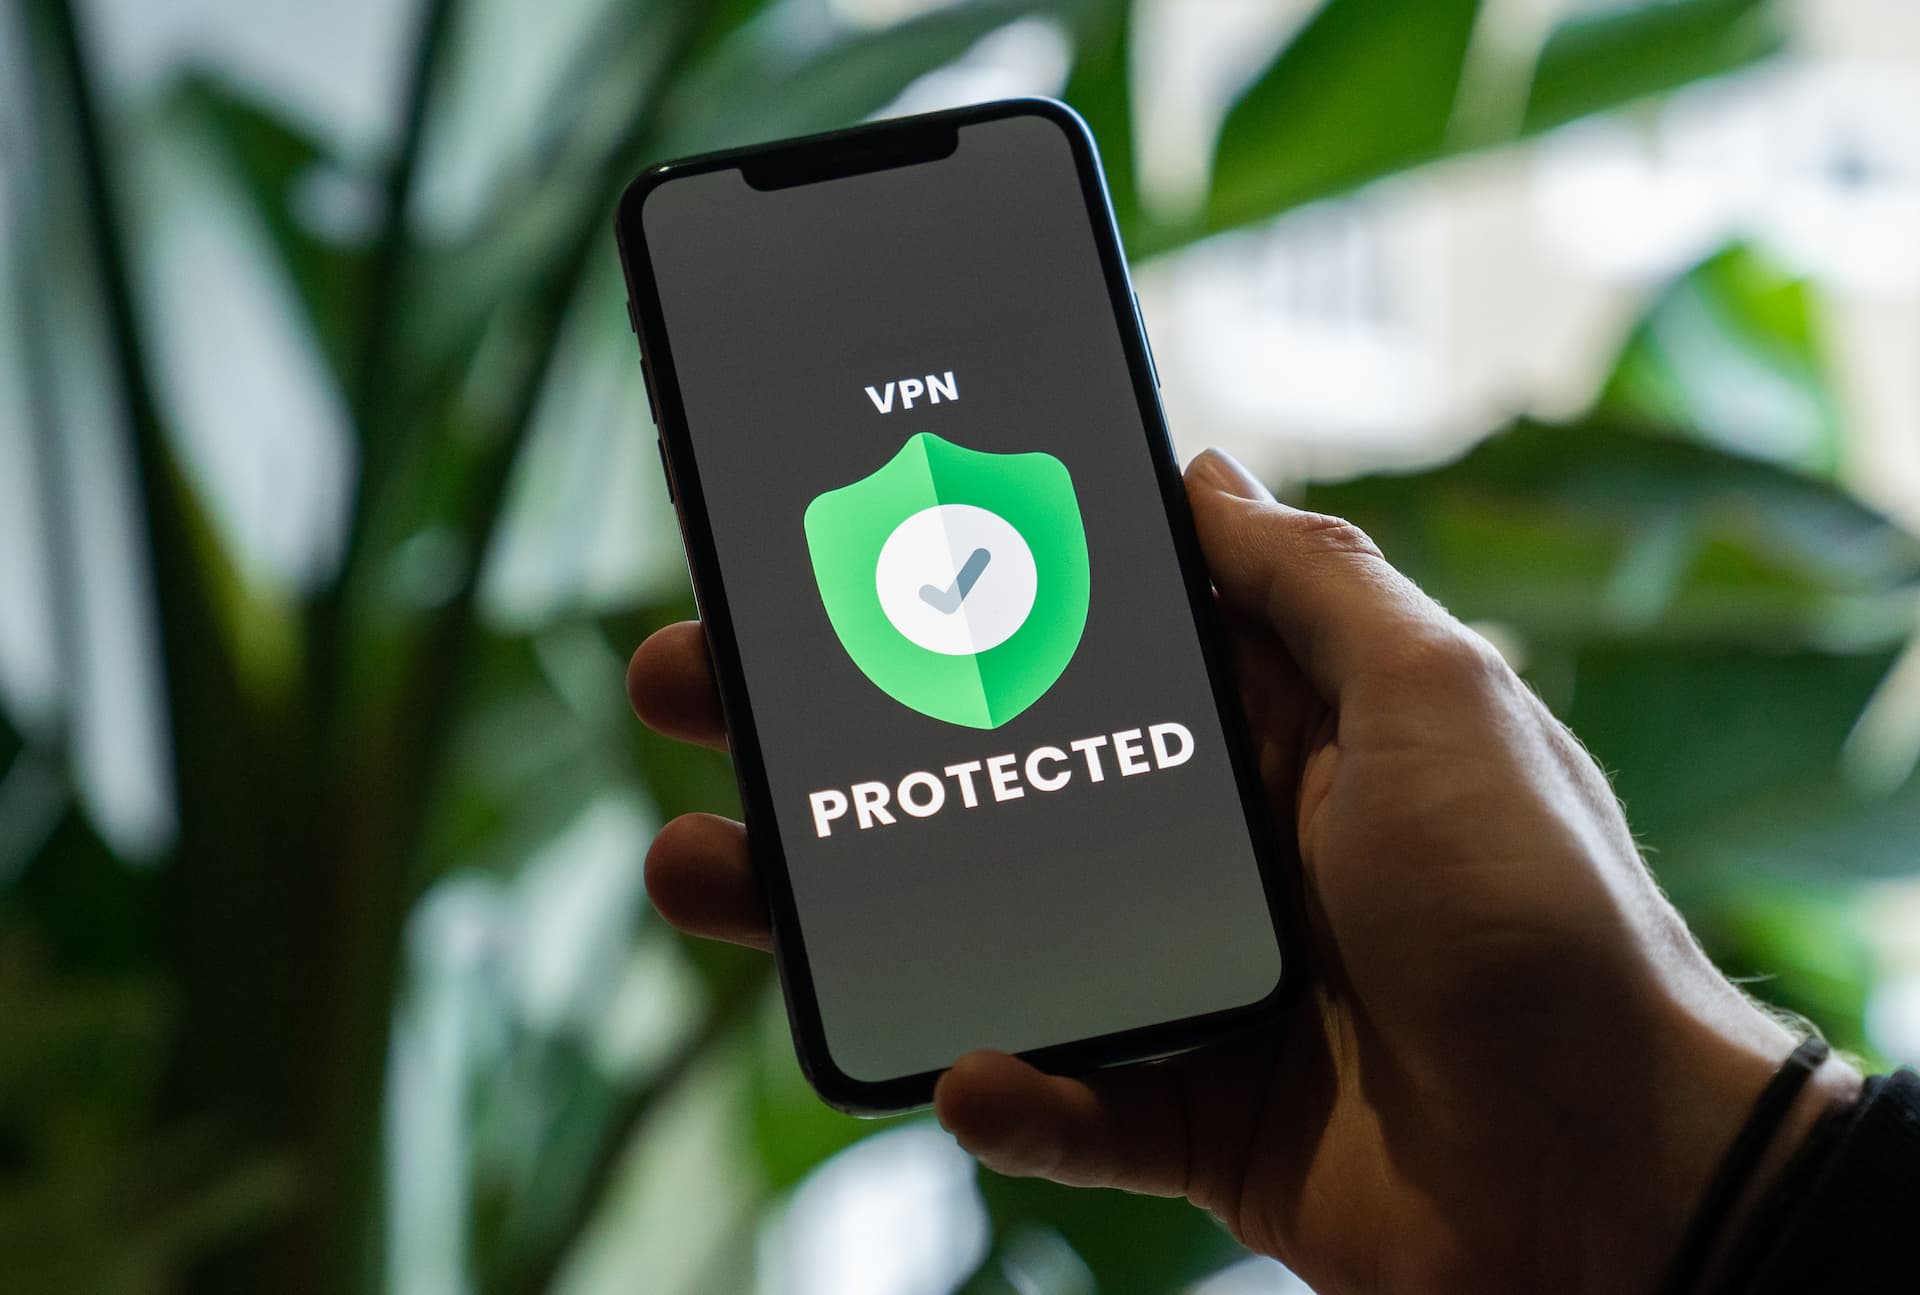 10 Tips To Keep Your Smartphone Safe - Use VPN